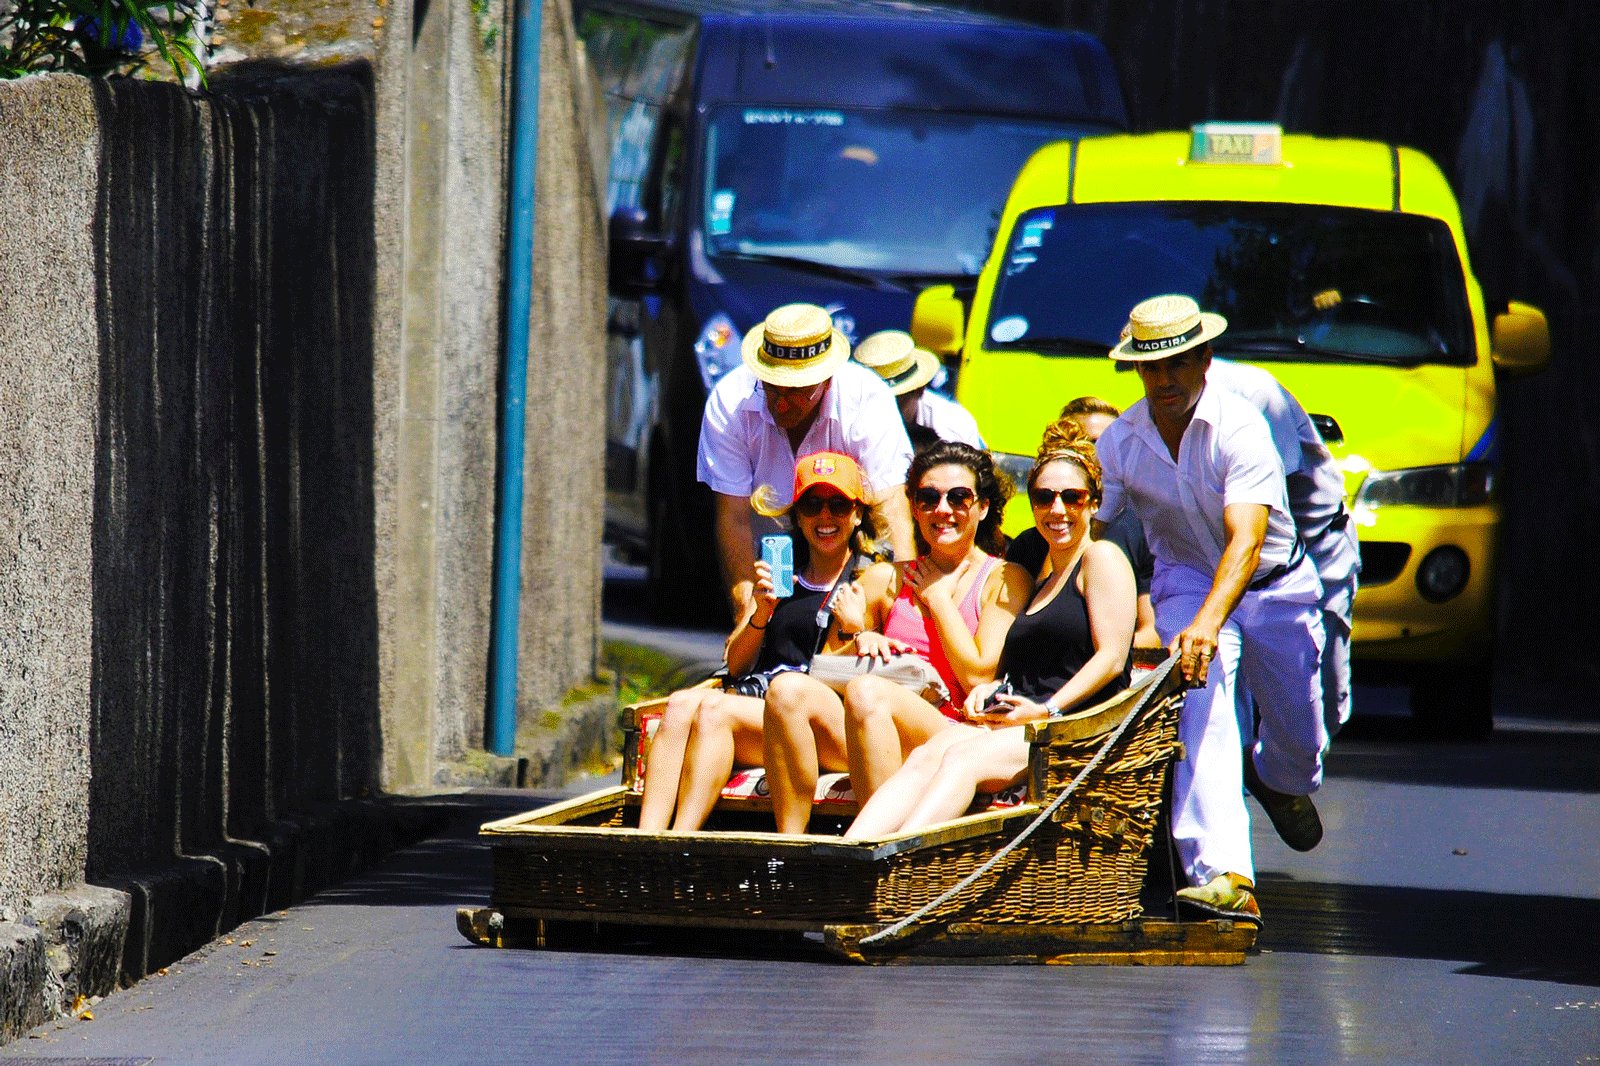 How to ride in toboggan wooden sledge down asphalt road on Madeira